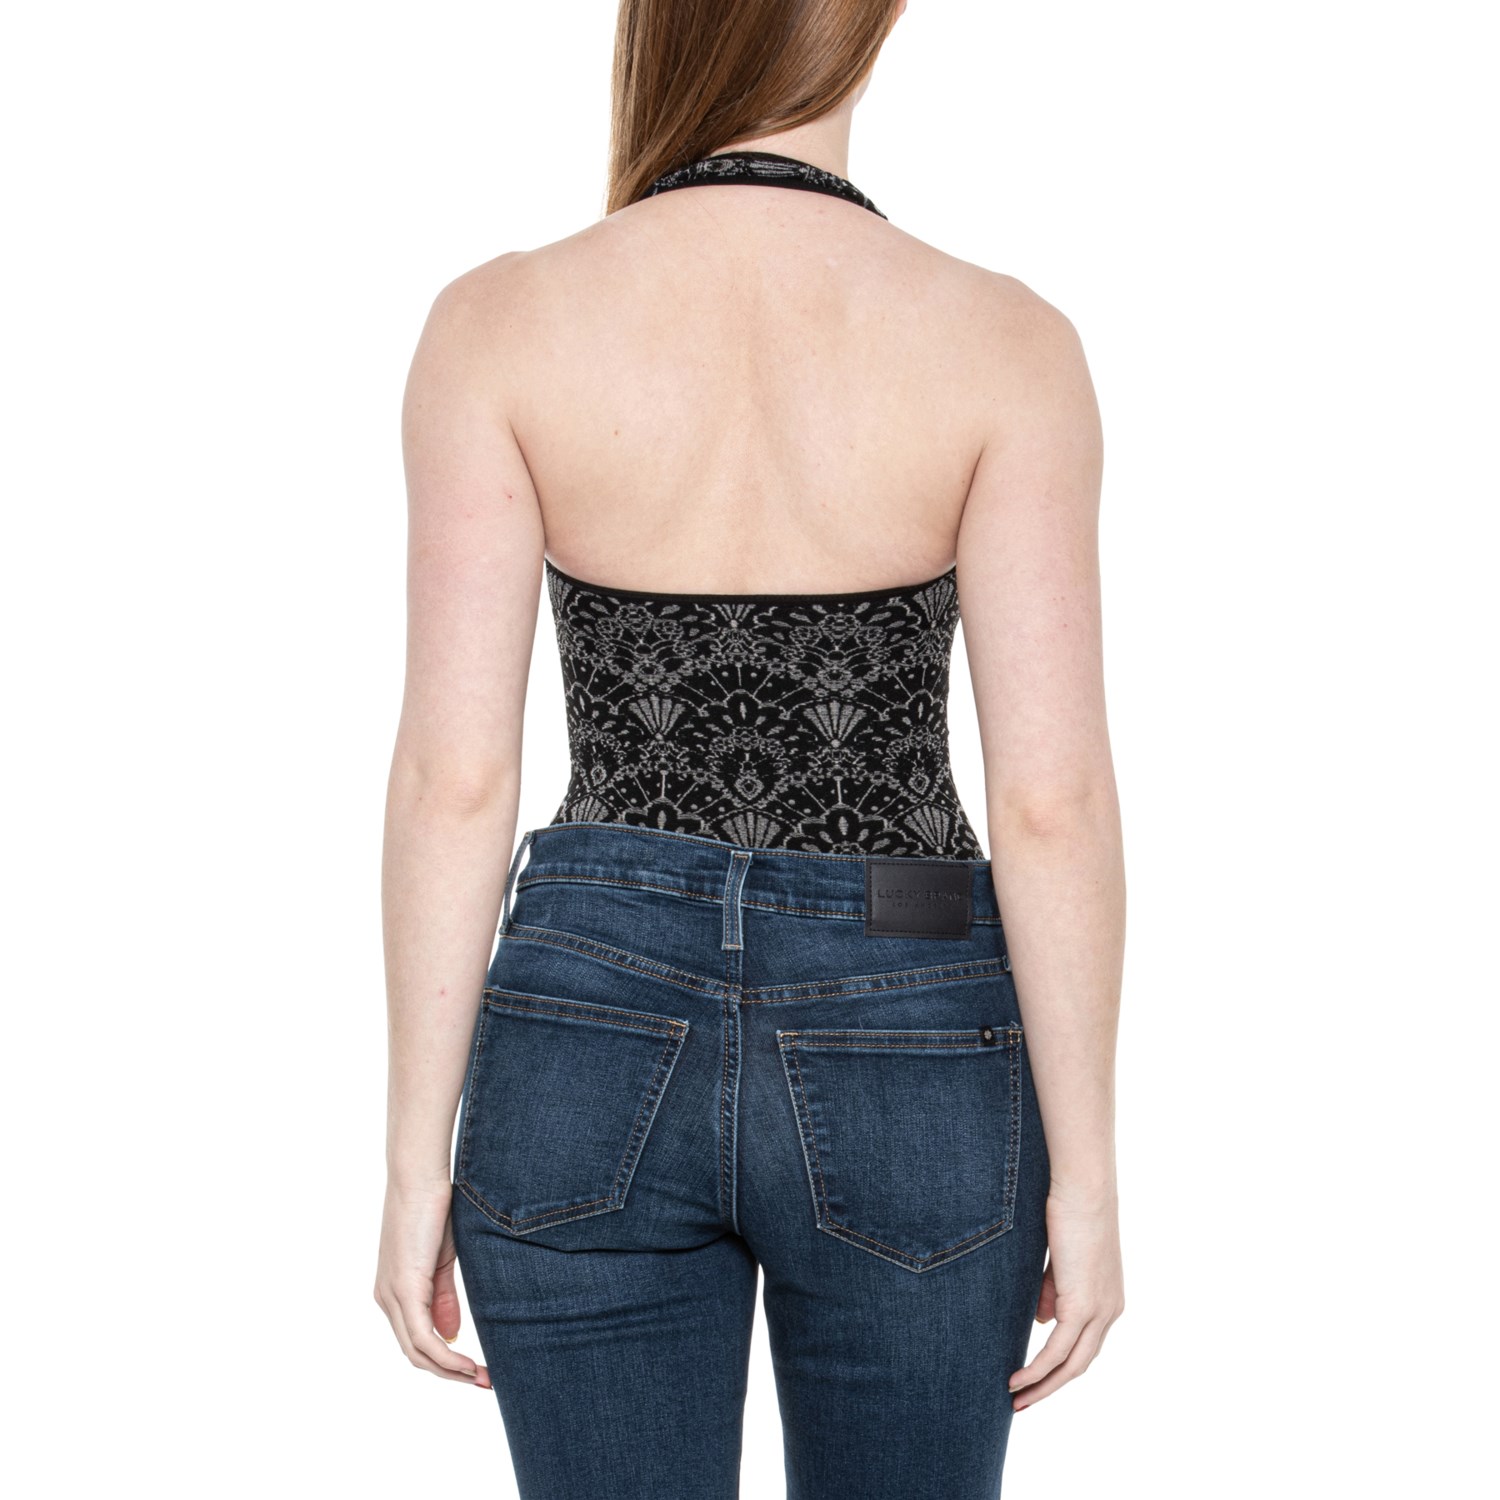 Free People Women's First Call Lace Sleeveless Bodysuit Top New $50